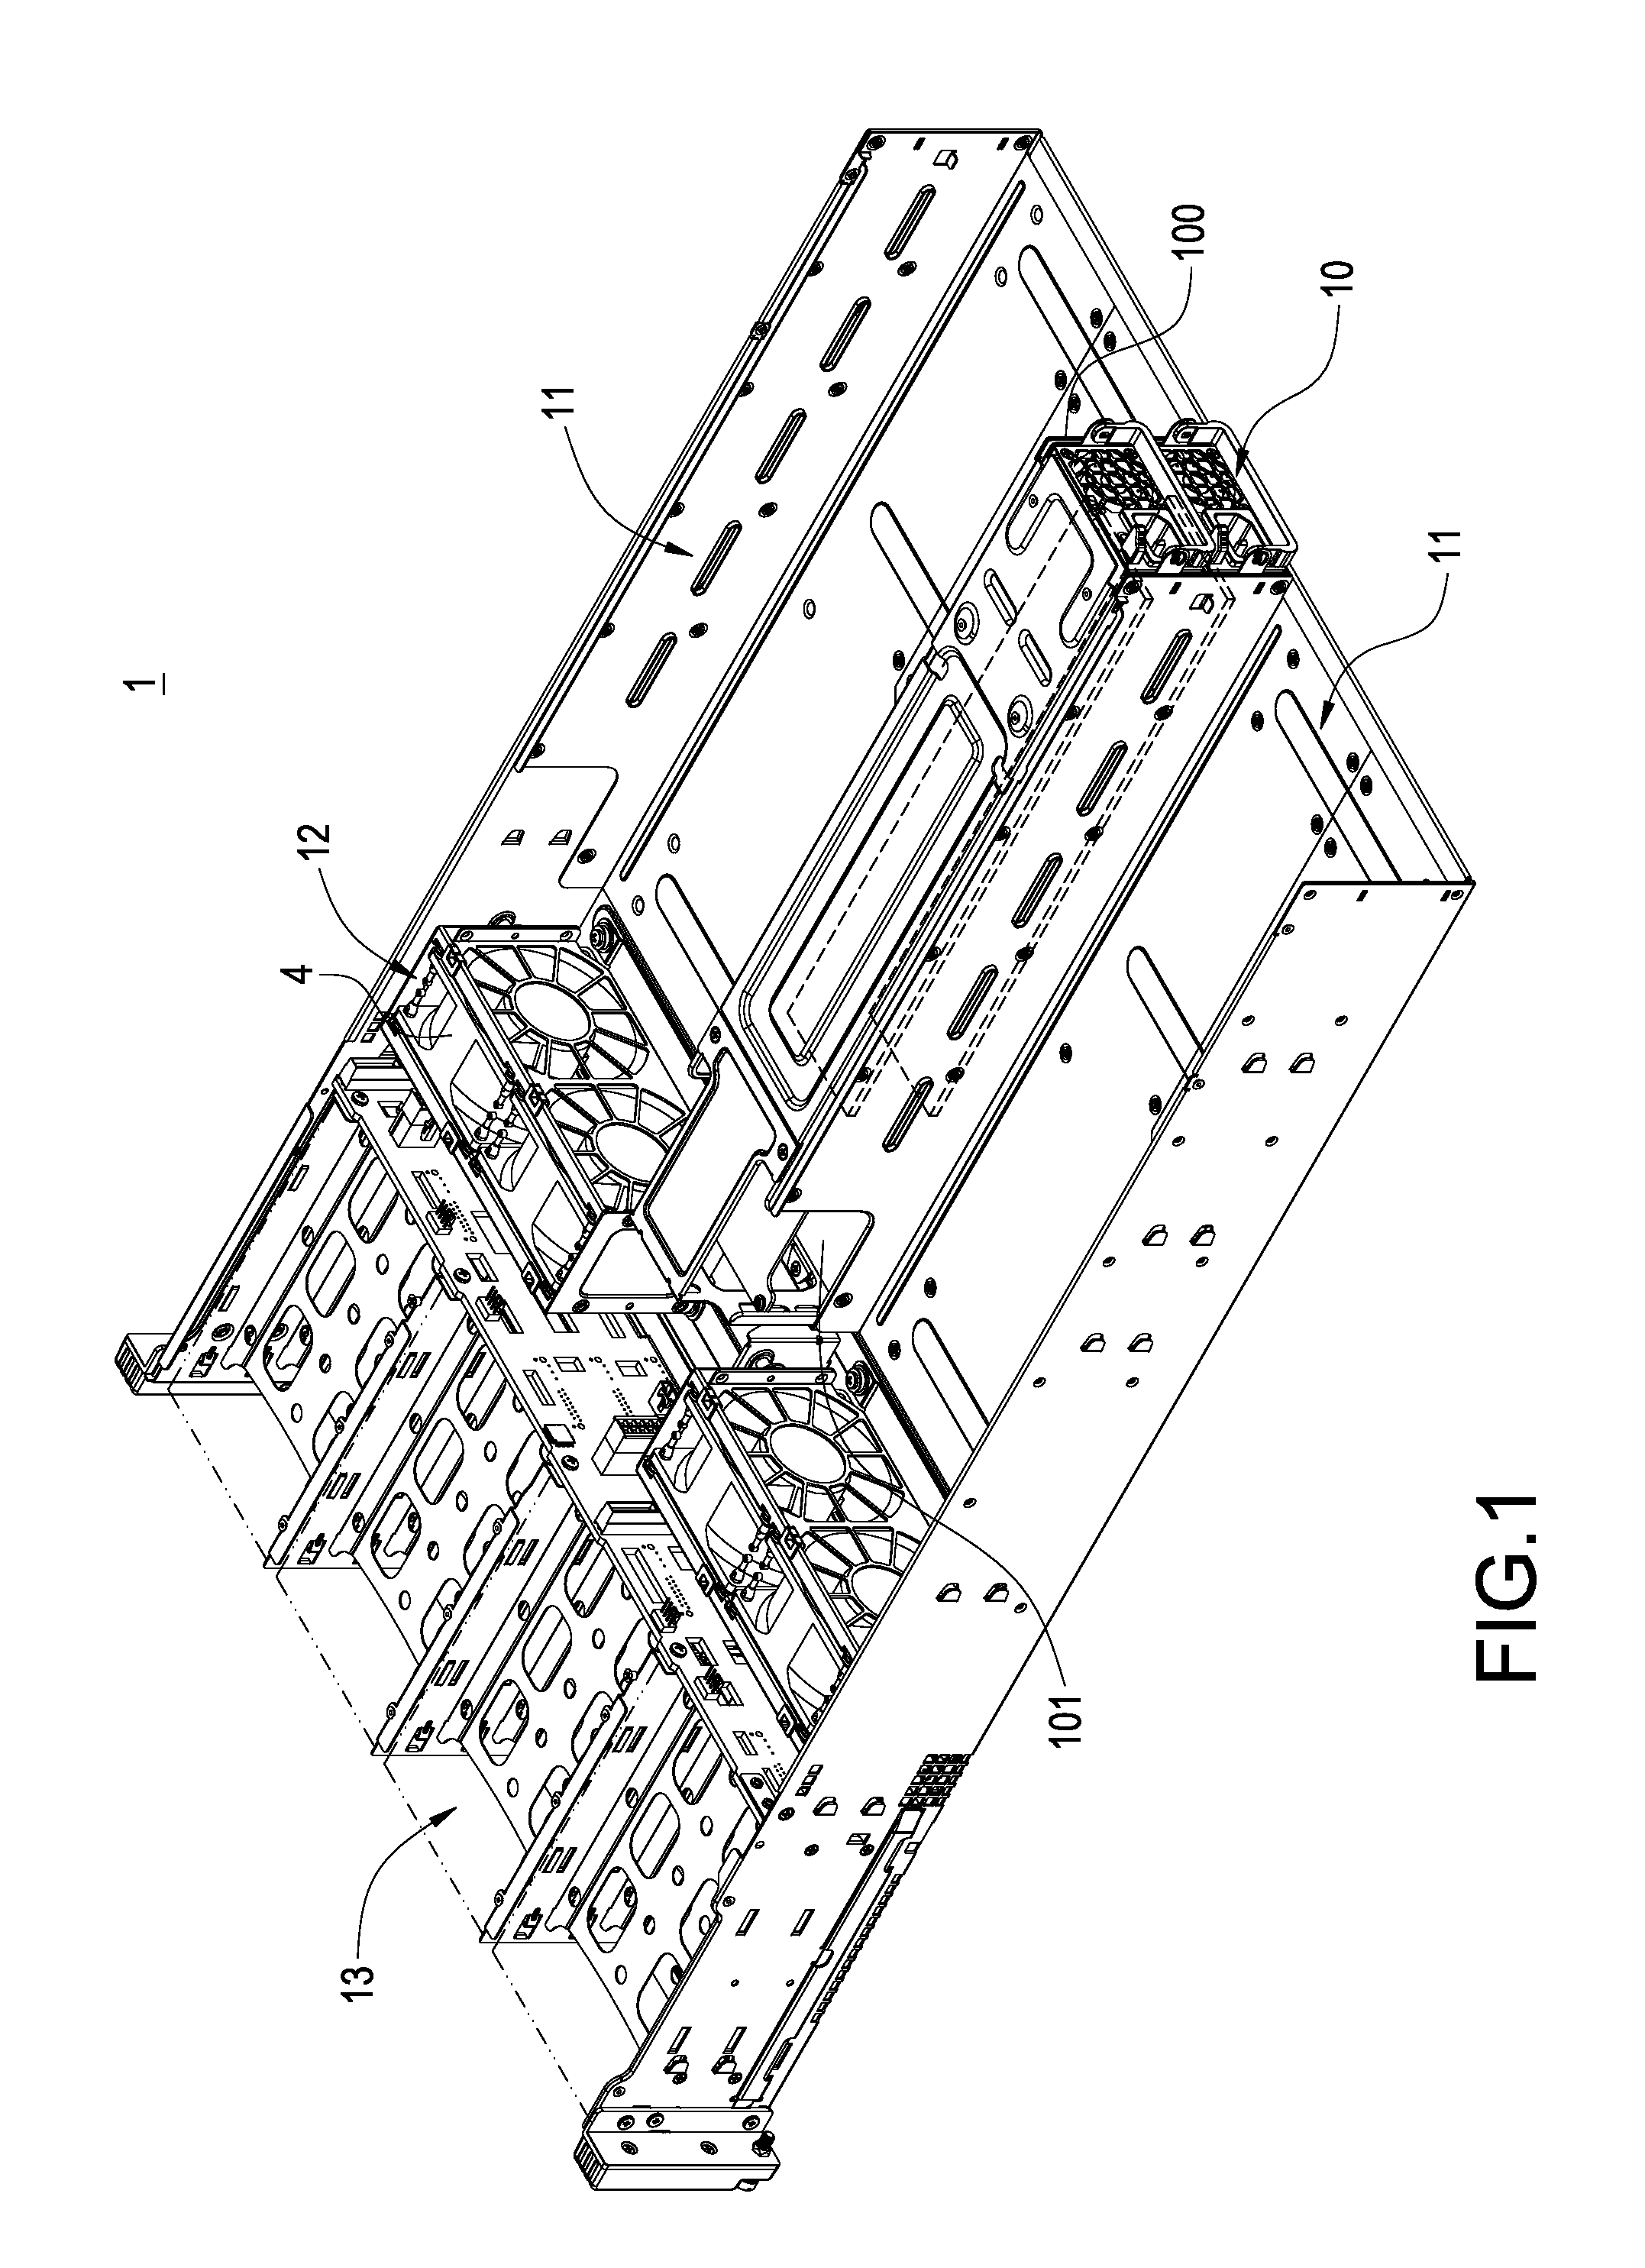 Industrial computer chassis structure with power source disposed centrally